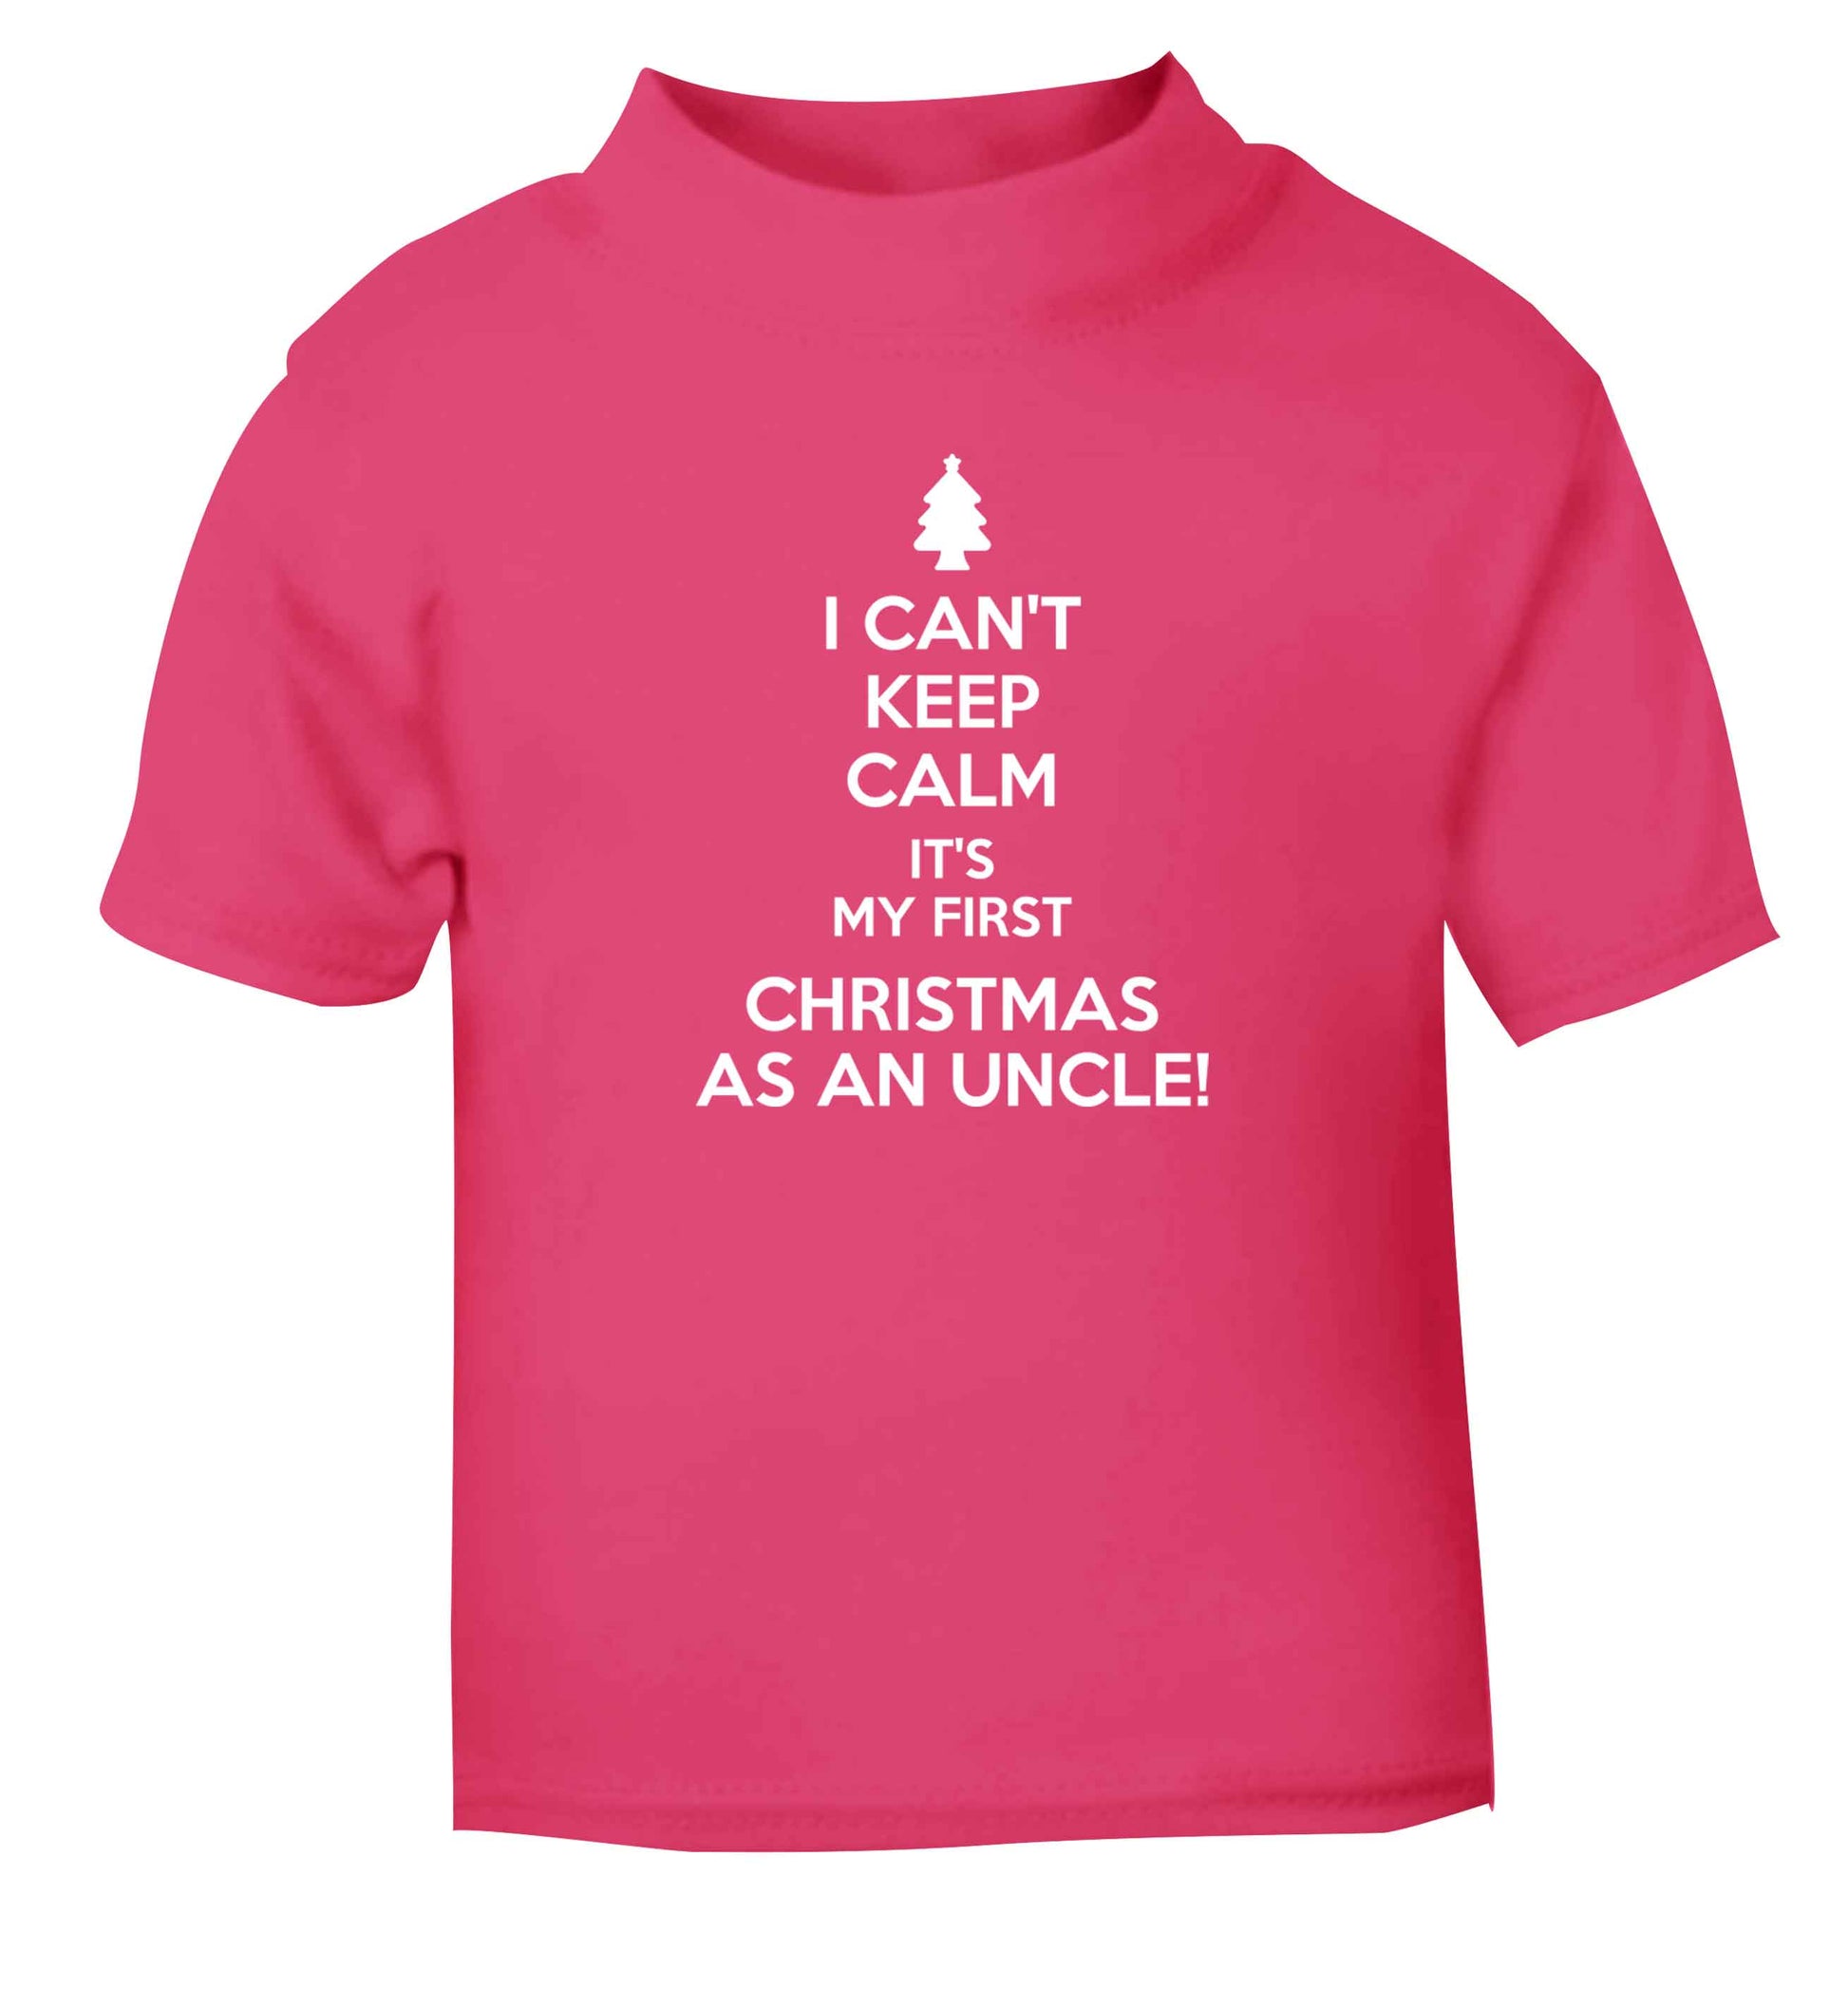 I can't keep calm it's my first Christmas as an uncle! pink Baby Toddler Tshirt 2 Years